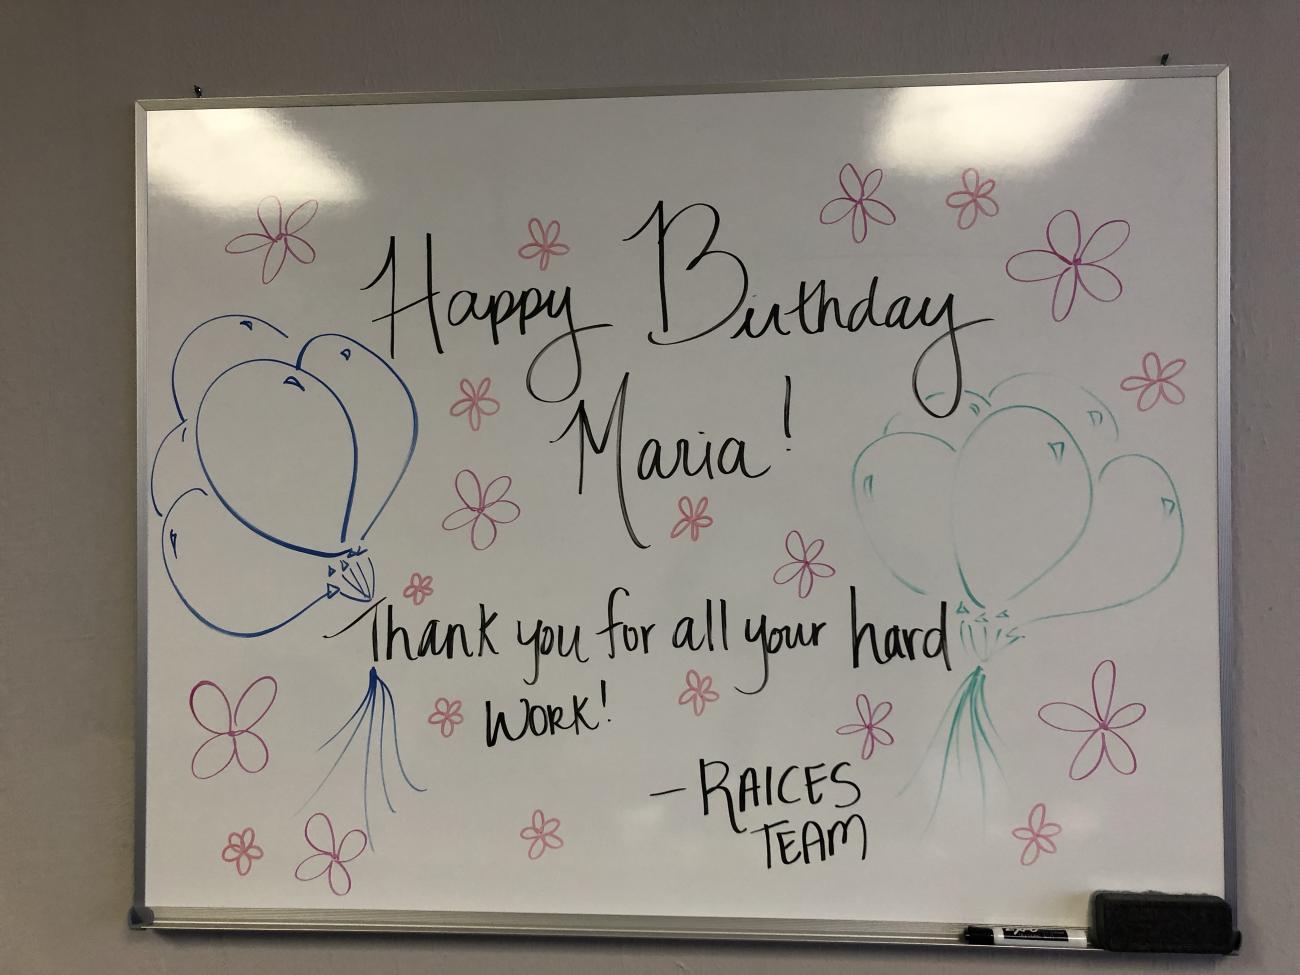 A "Happy Birthday" message from the office for Maria. 